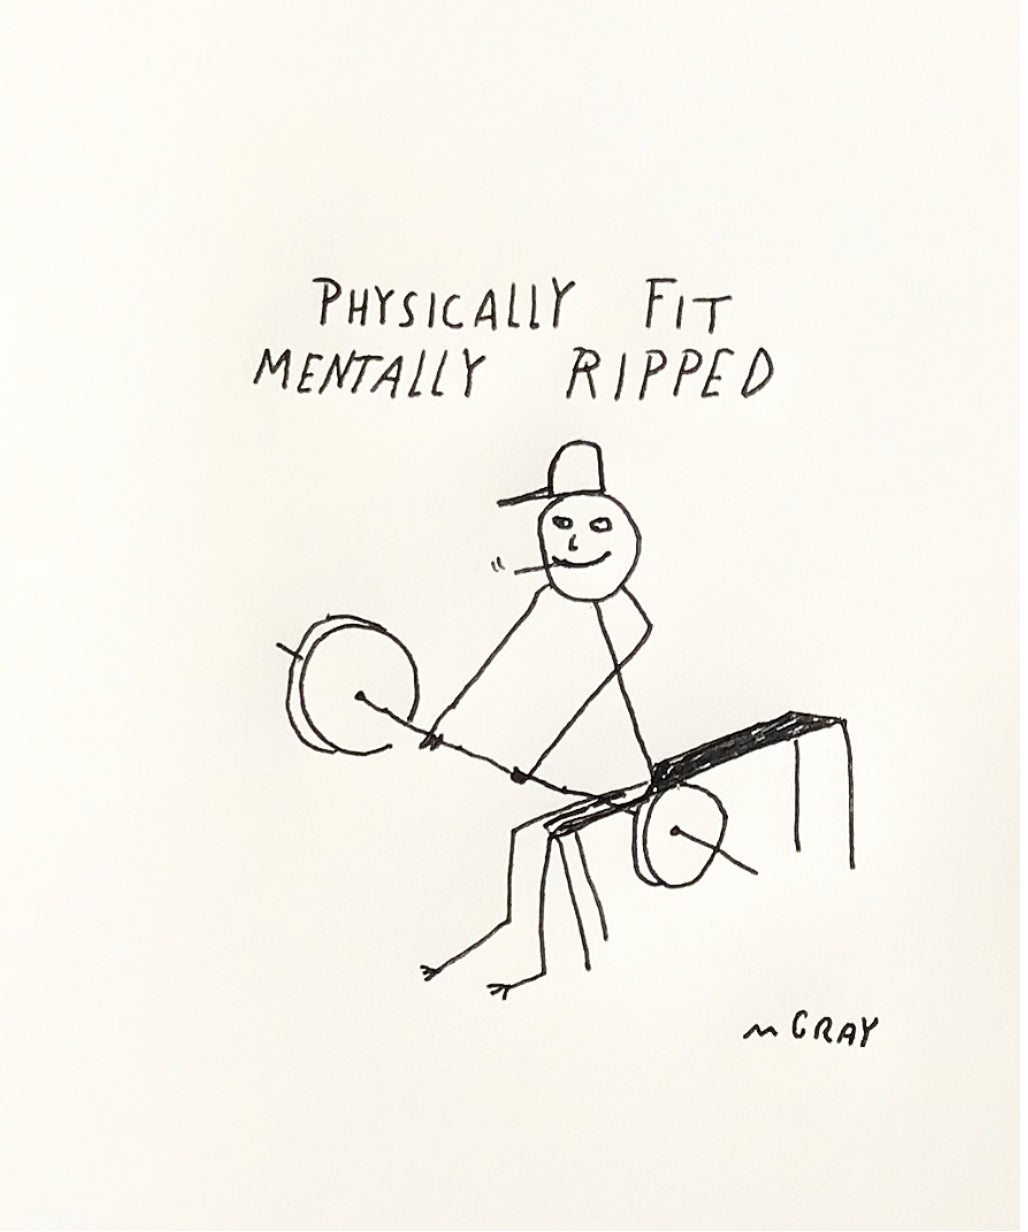 PHYSICALLY FIT